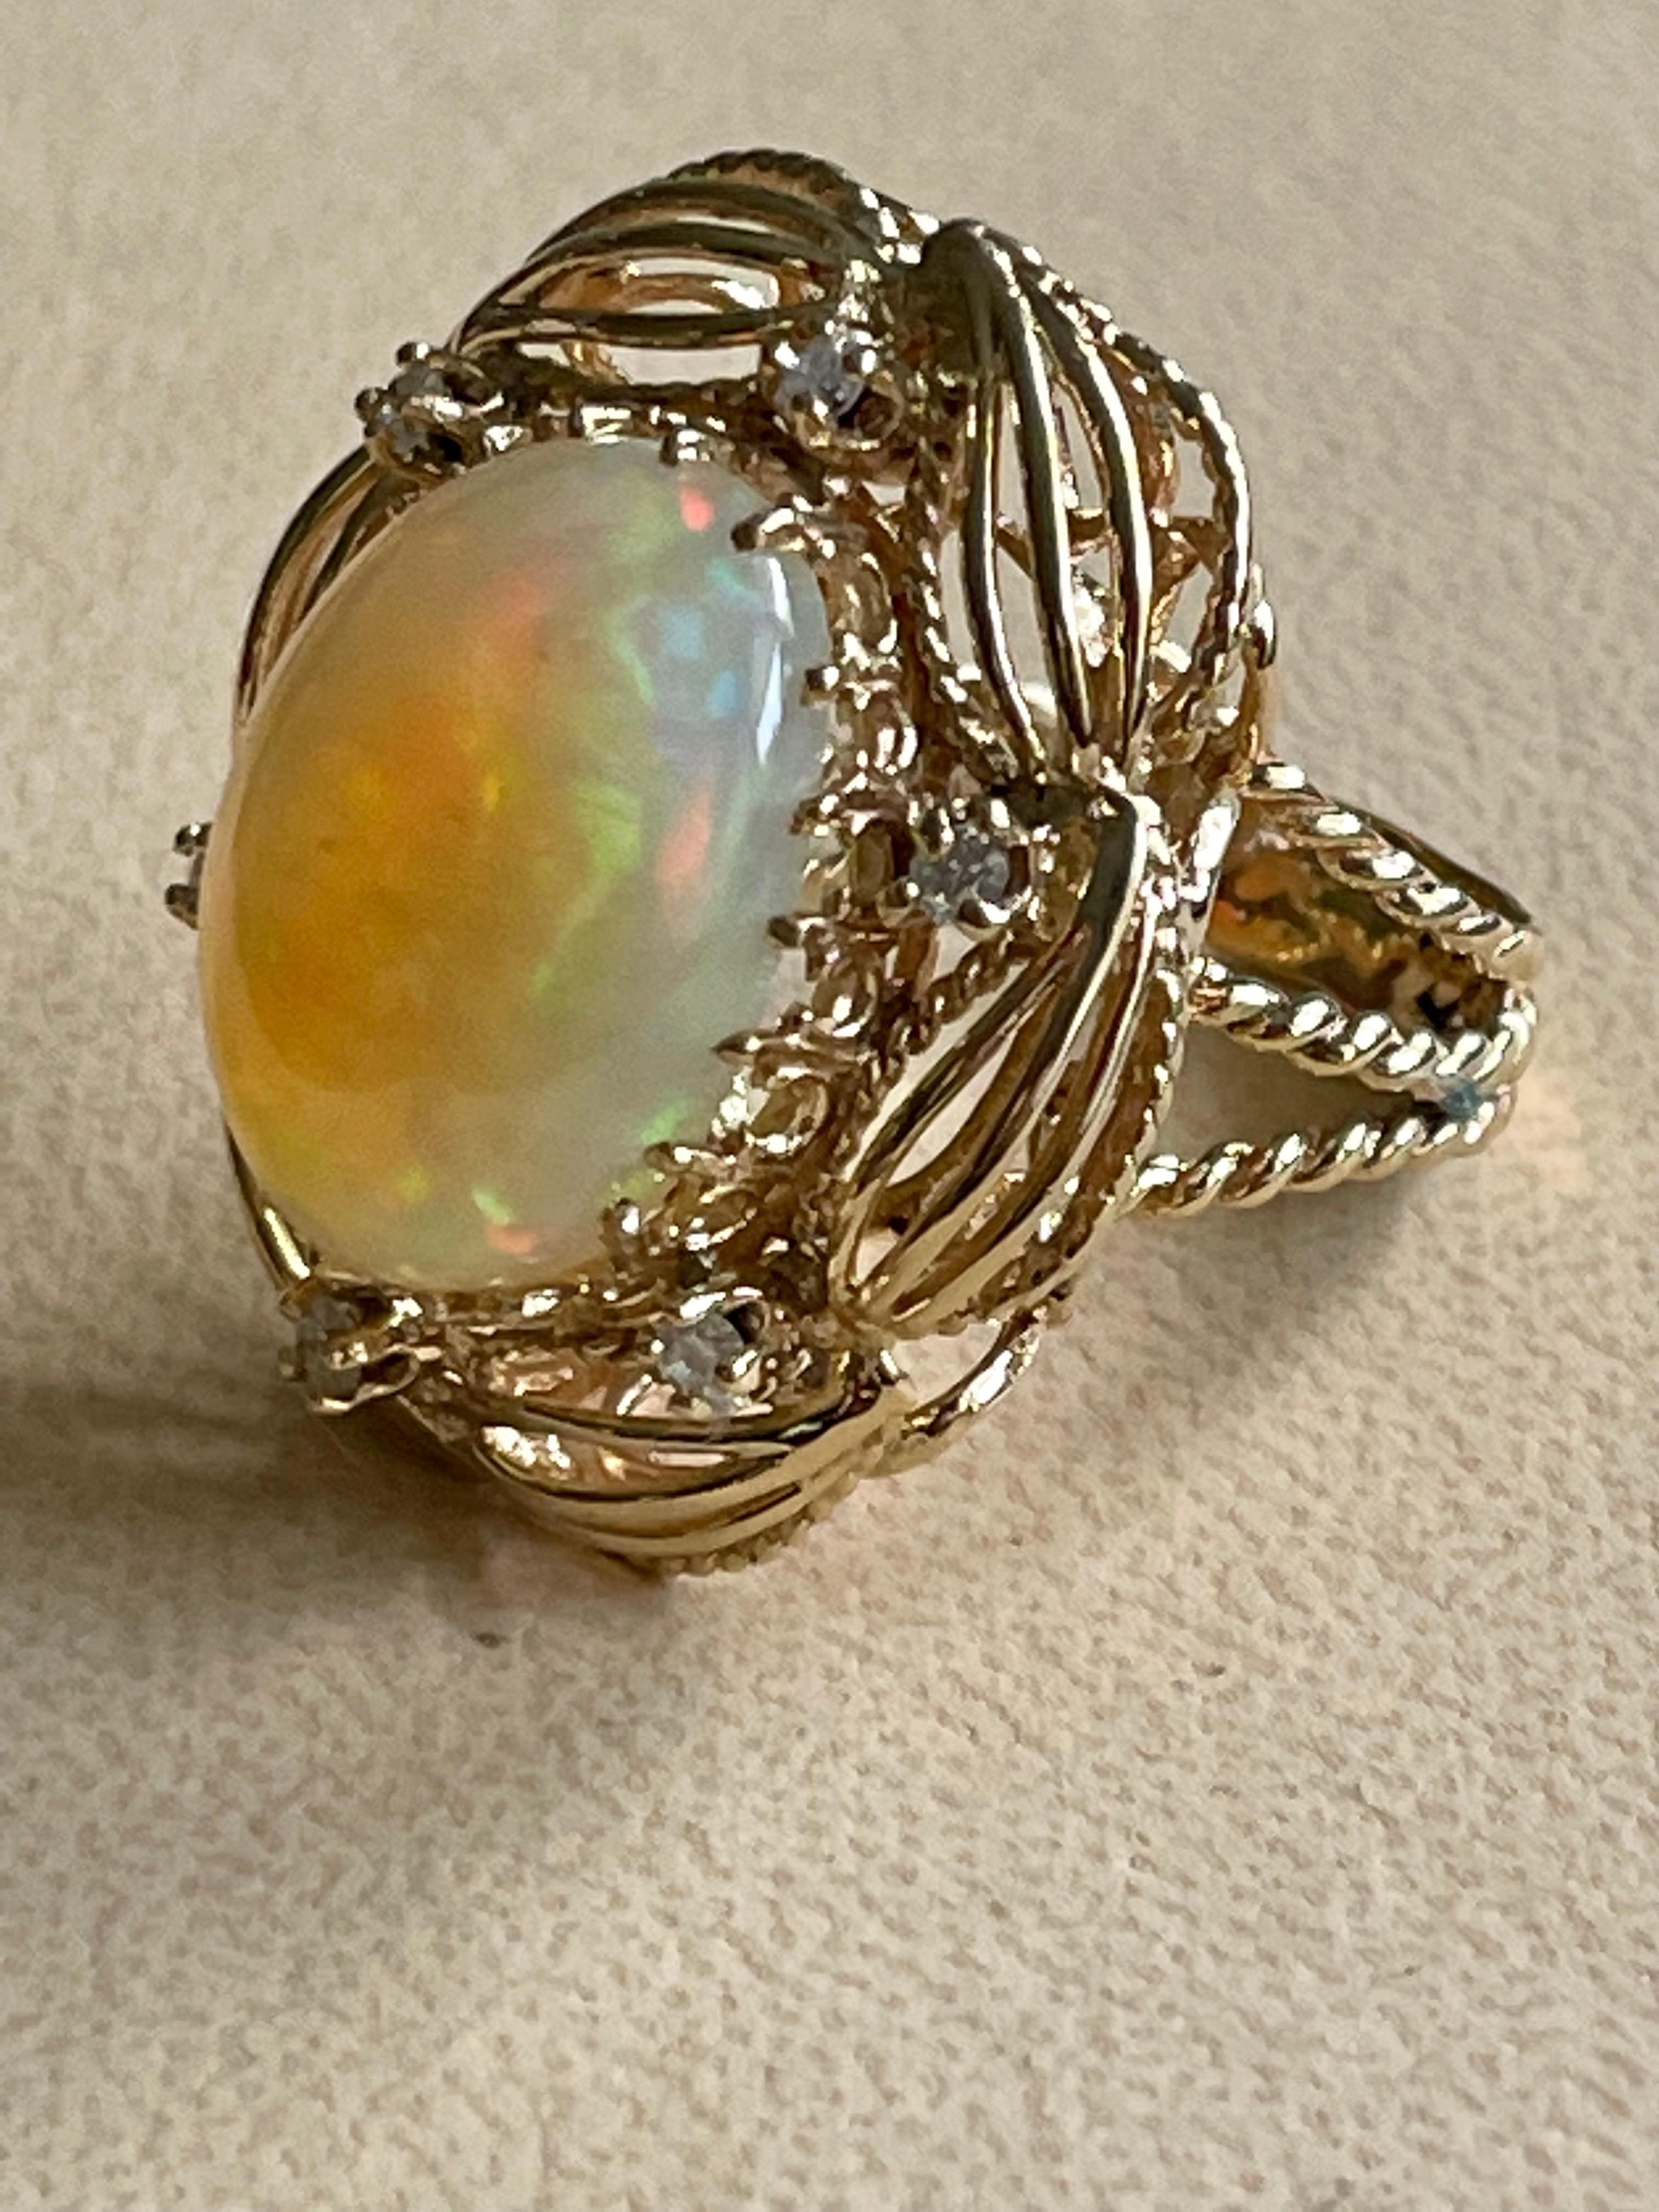 15 Carat Oval Shape Ethiopian Opal Cocktail Ring 14 Karat Yellow Gold Solid Ring 5